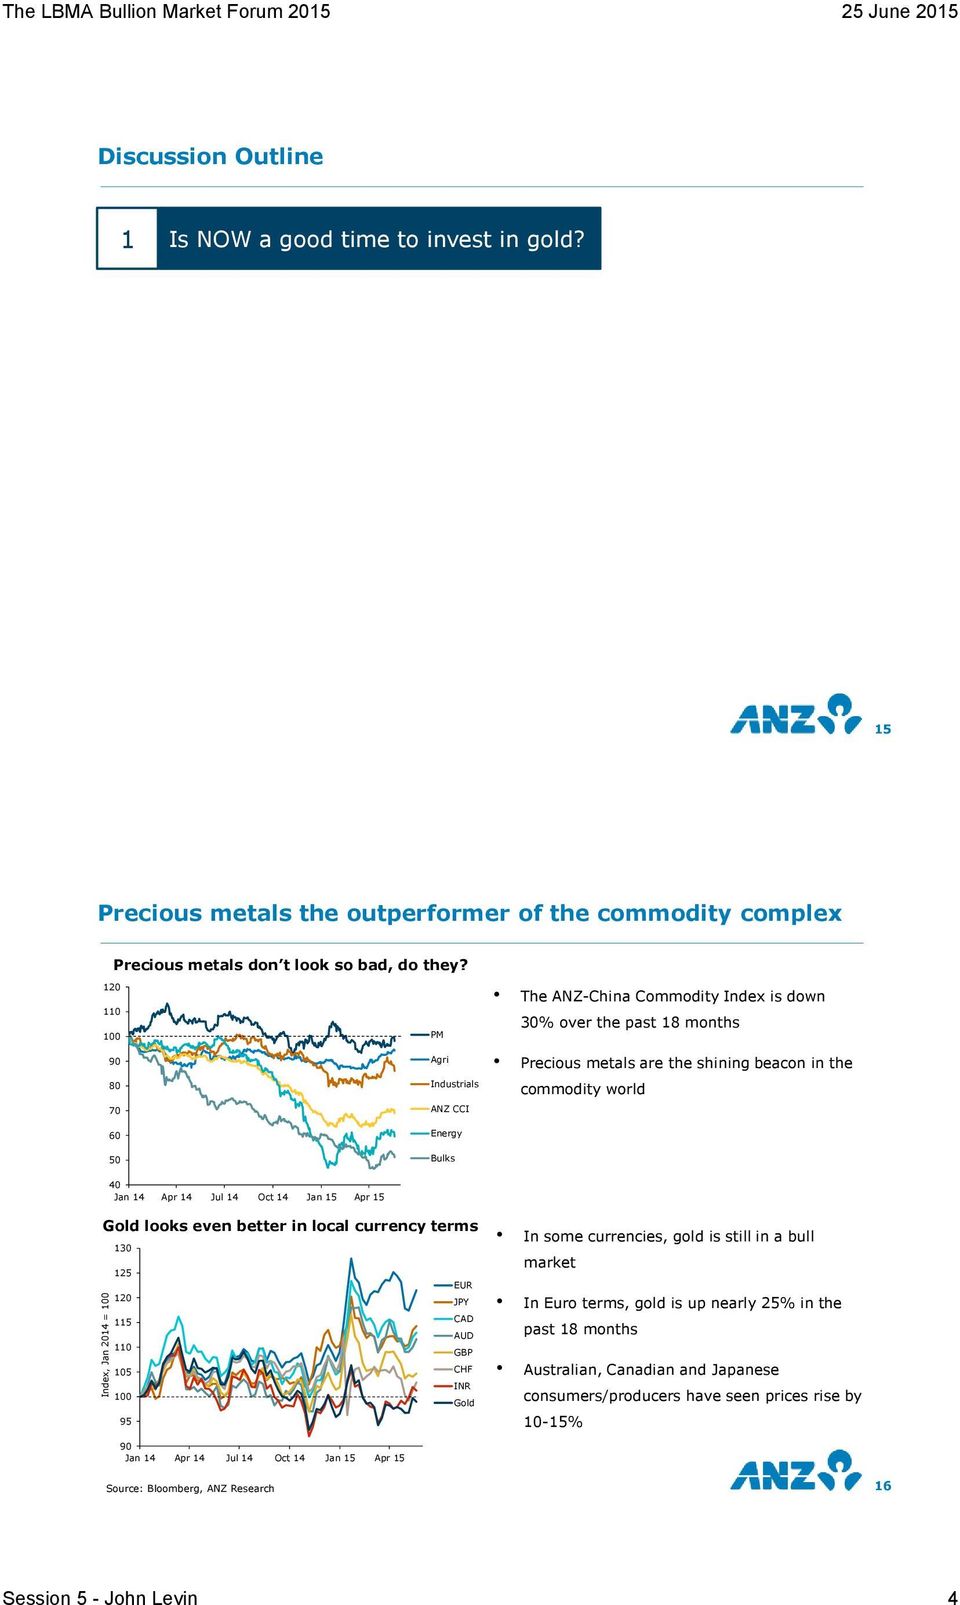 12 11 9 8 7 6 PM Agri Industrials ANZ CCI Energy The ANZ-China Commodity Index is down 3% over the past 18 months Precious metals are the shining beacon in the commodity world 5 Bulks 4 Jan 14 Apr 14